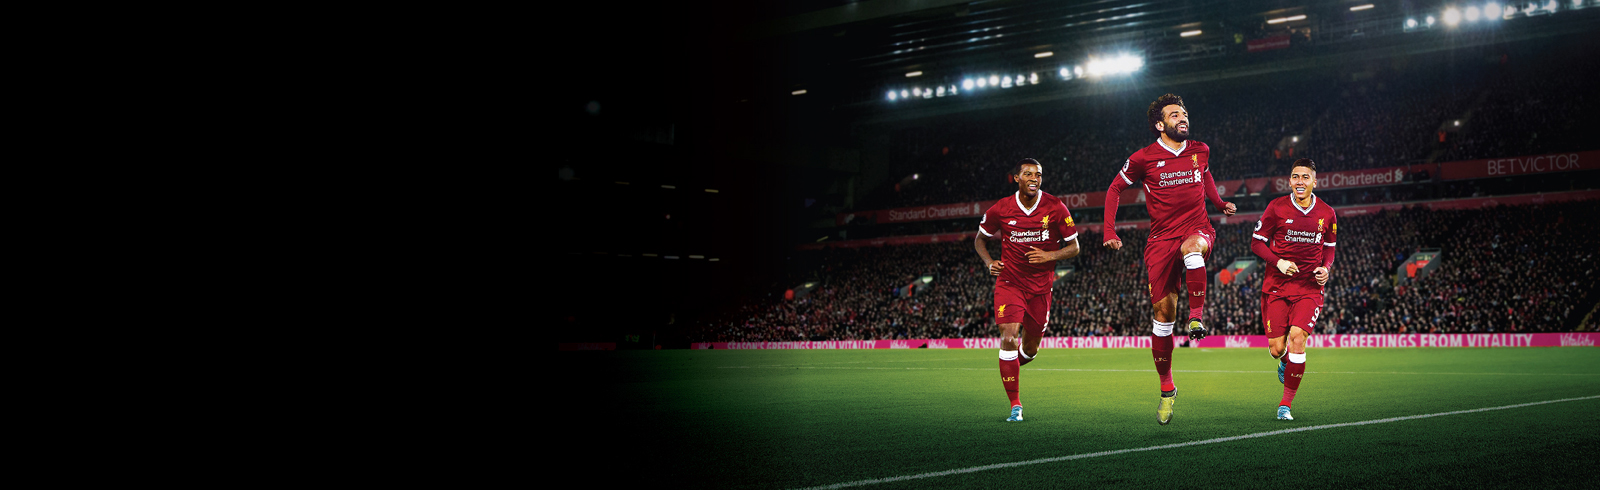 Stand to win a trip to Anfield when you activate online banking